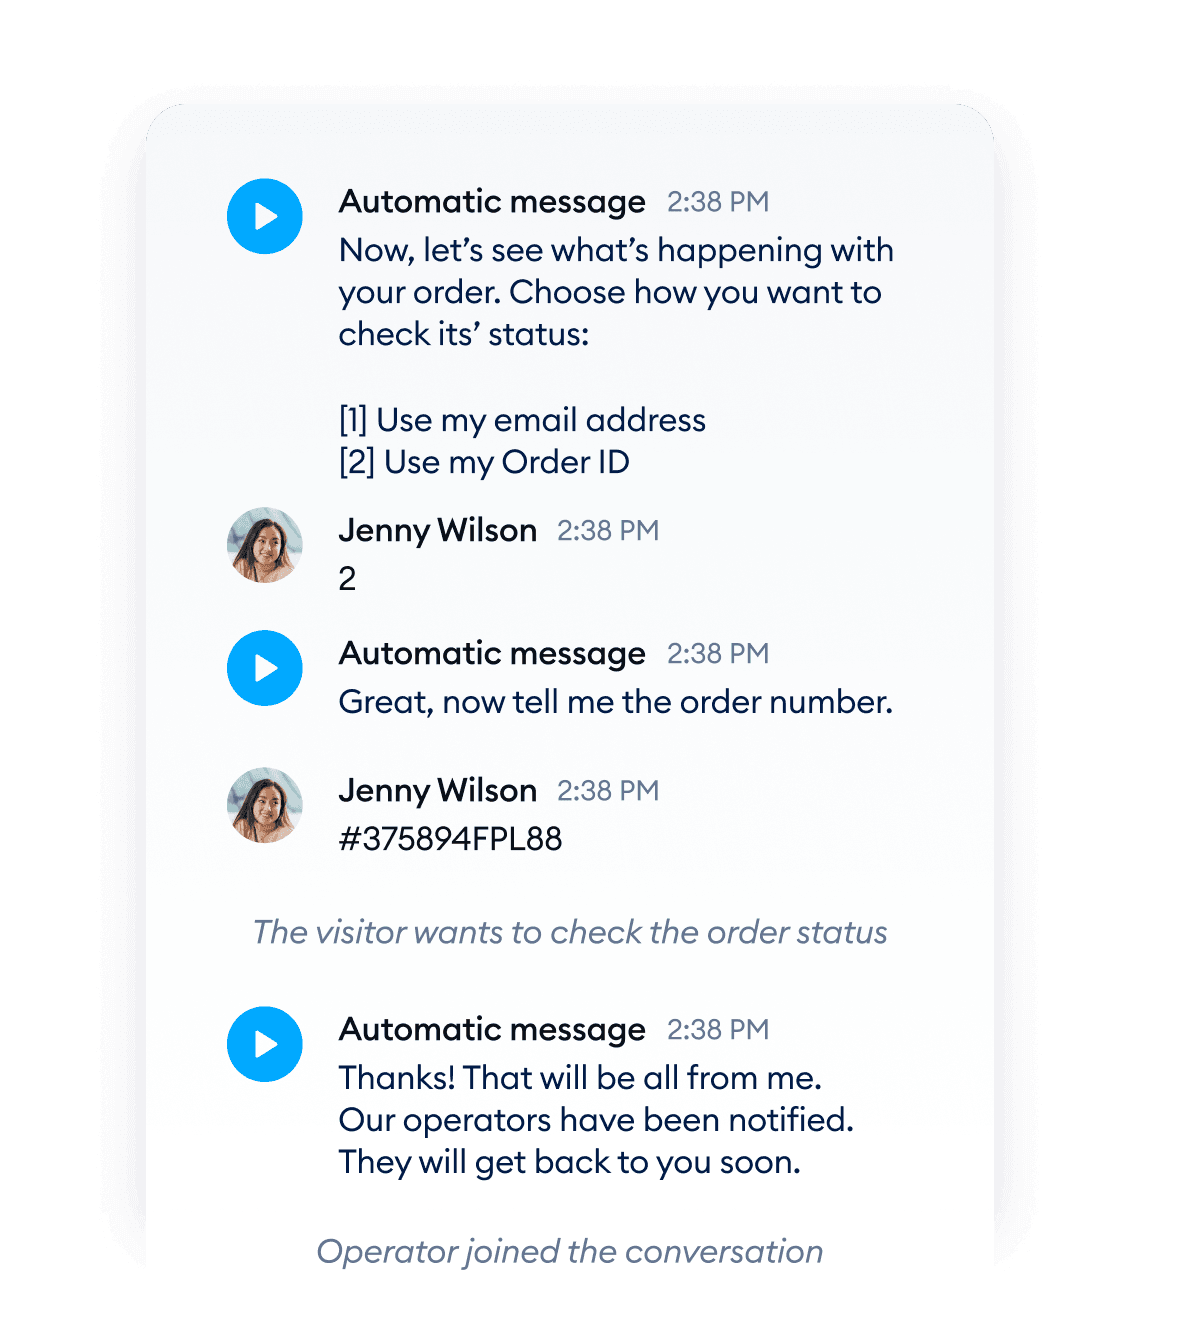 Automate your team’s work